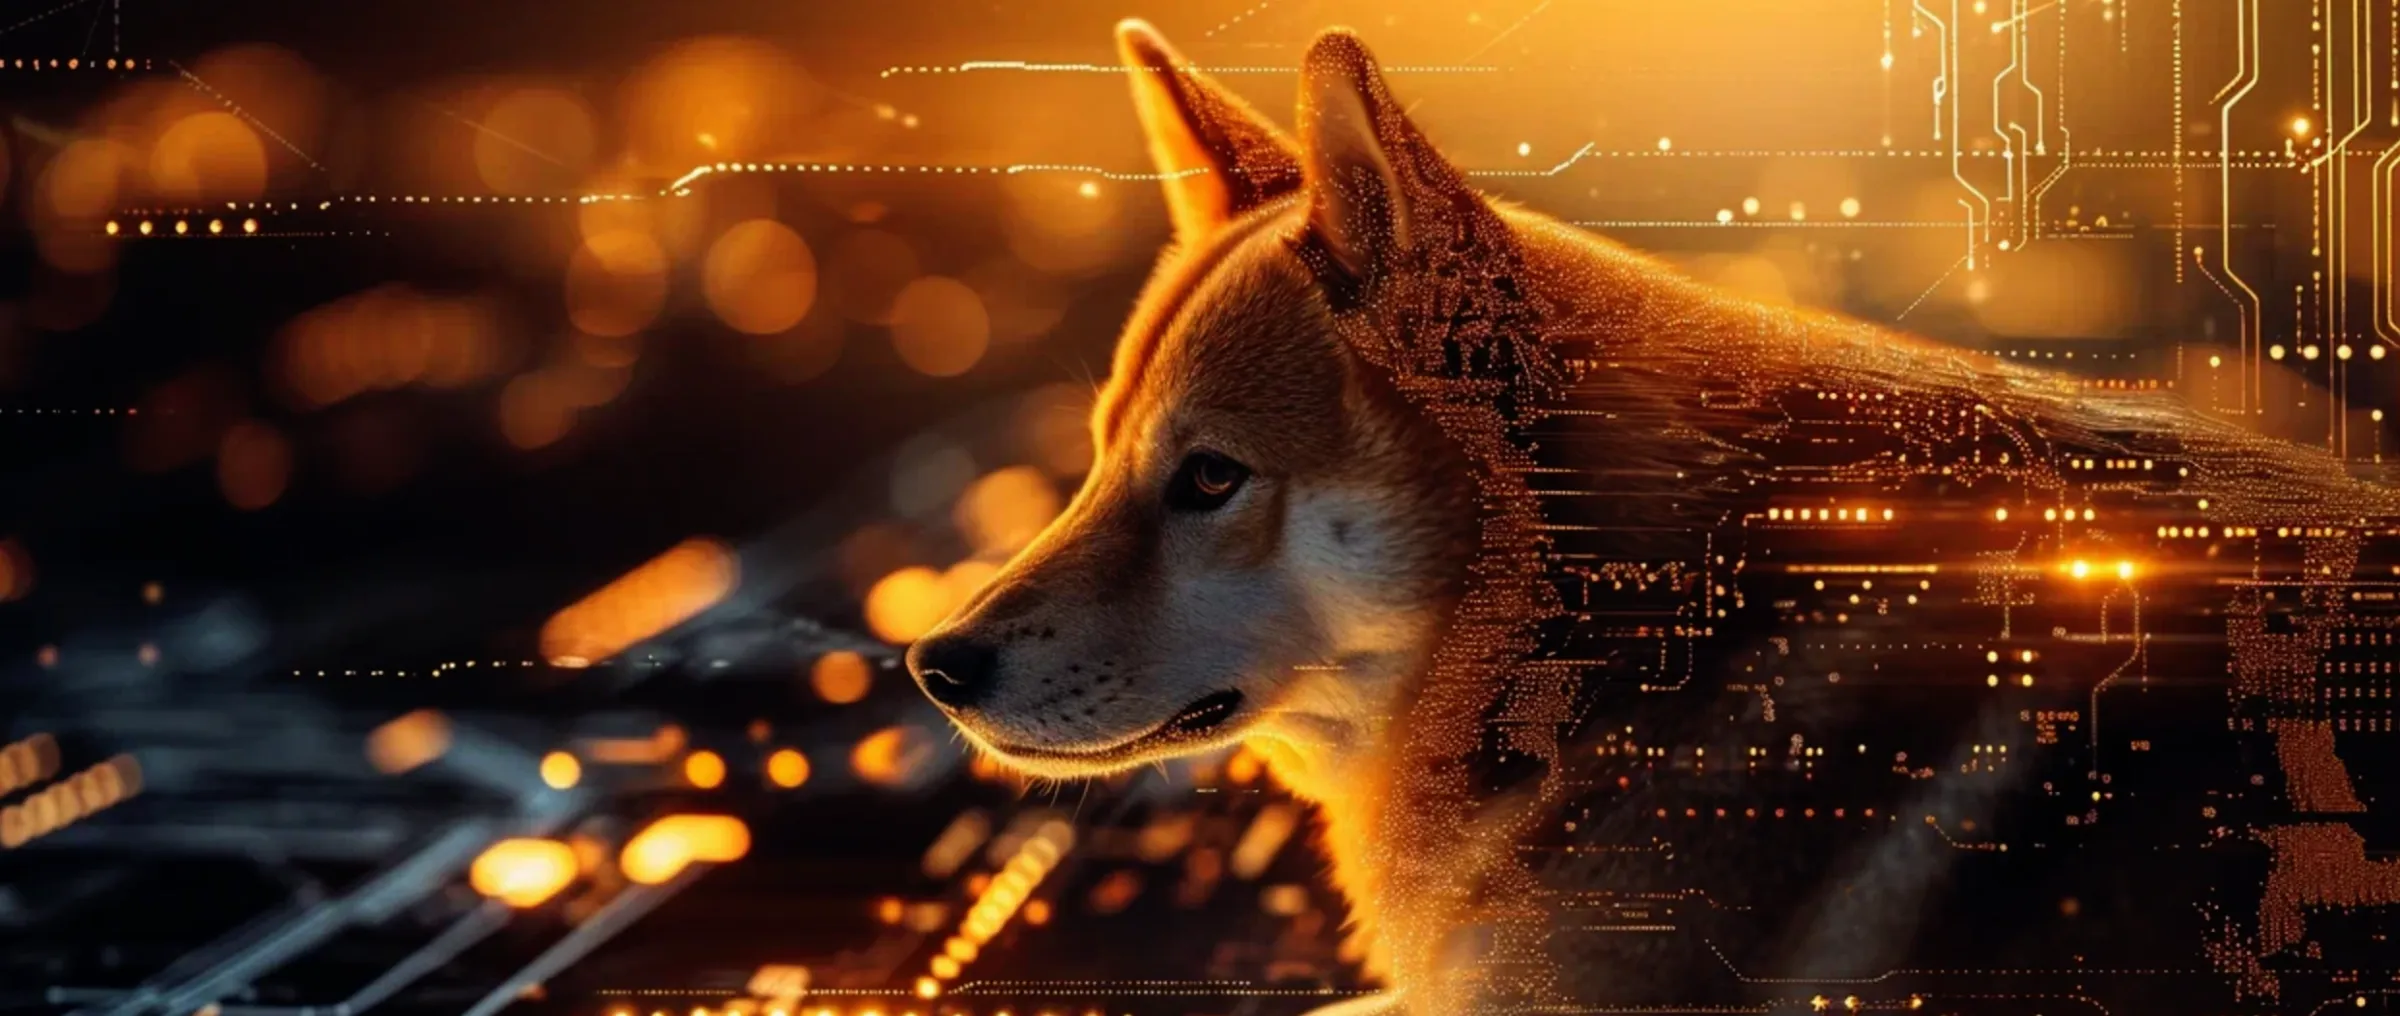 What conditions can lead to a 30% reduction in the price of Dogecoin?